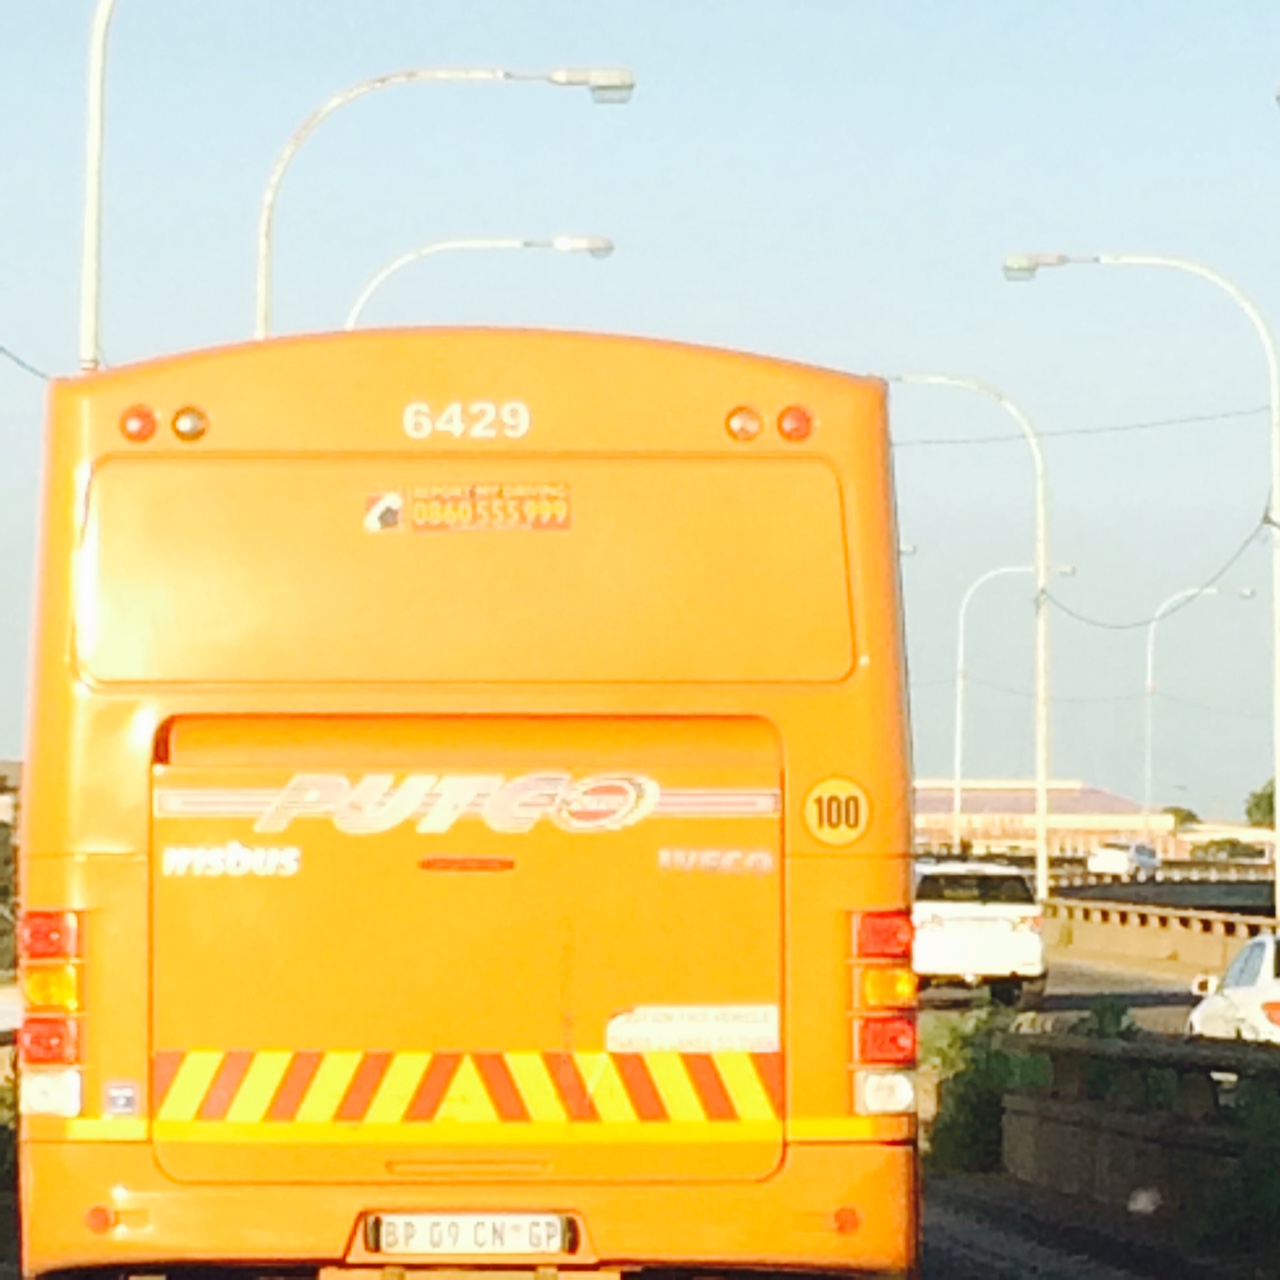 Putco provides feedback after report is submitted on bad driving by bus driver